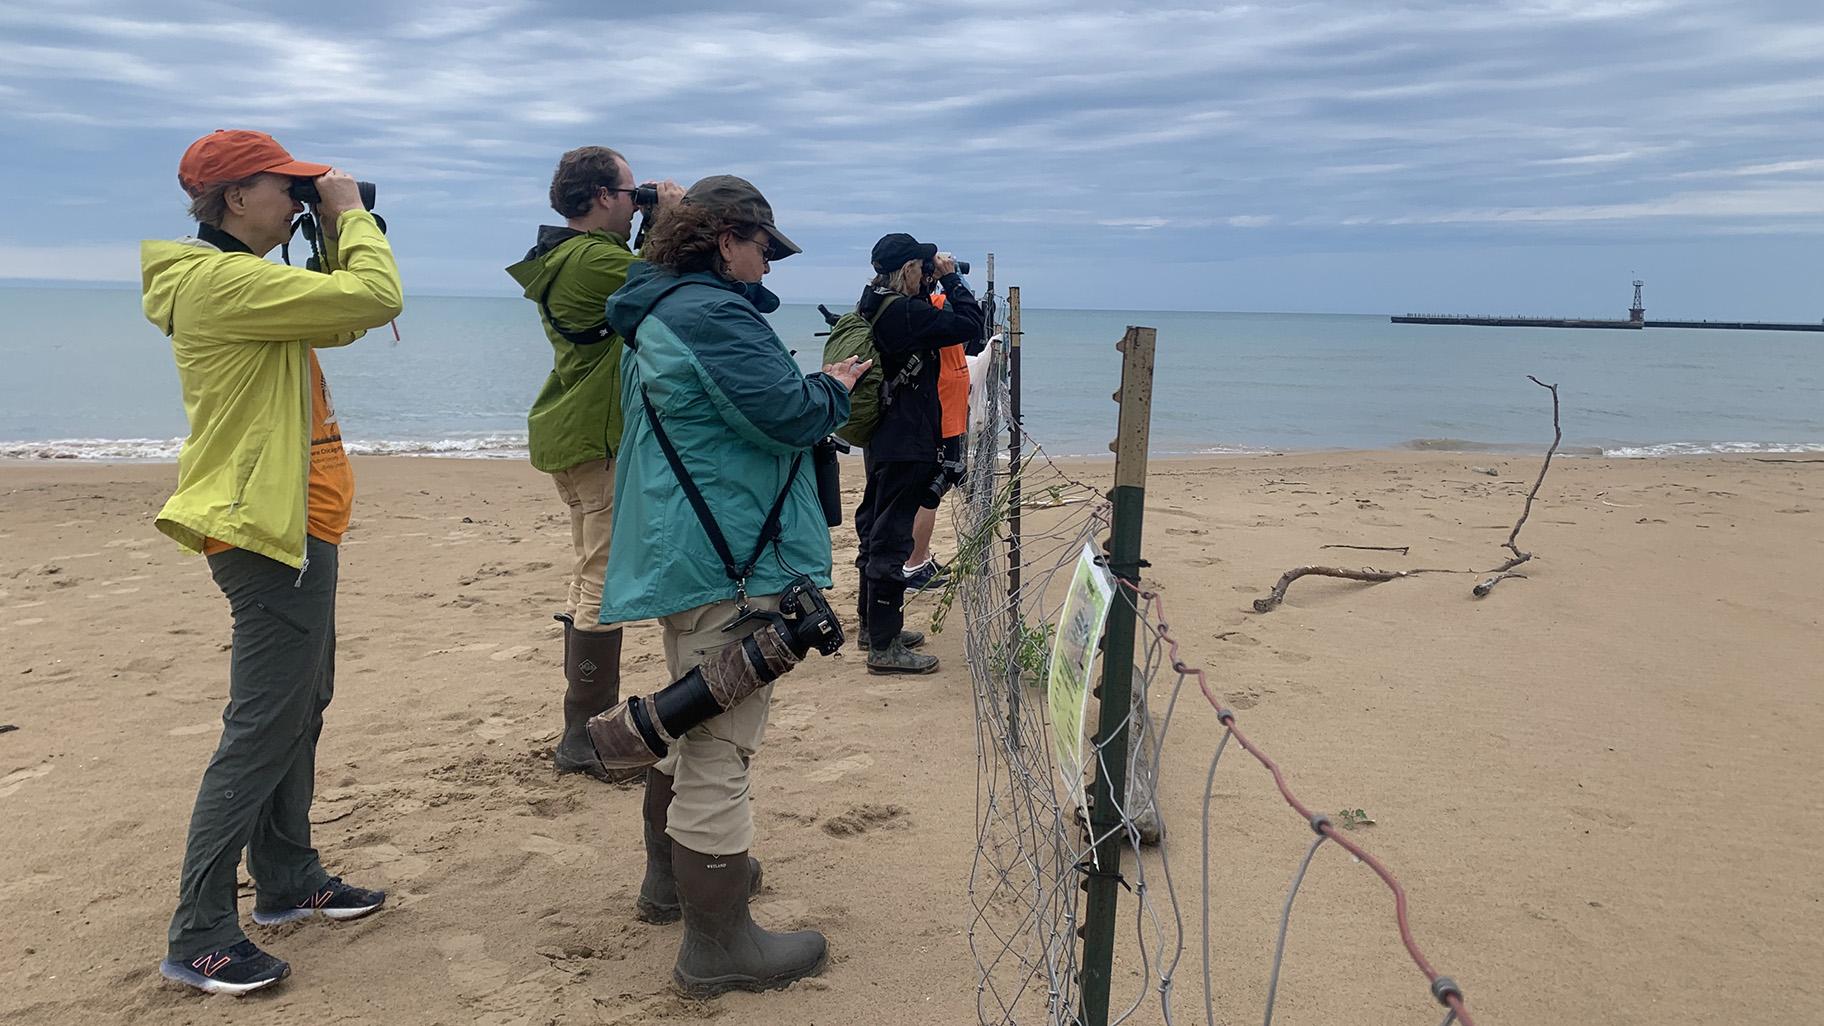 Birding enthusiasts and volunteers with the Chicago Piping Plovers group gather to monitor piping plovers at Montrose following the release of three new plovers July 12, 2023. (Eunice Alpasan / WTTW News)